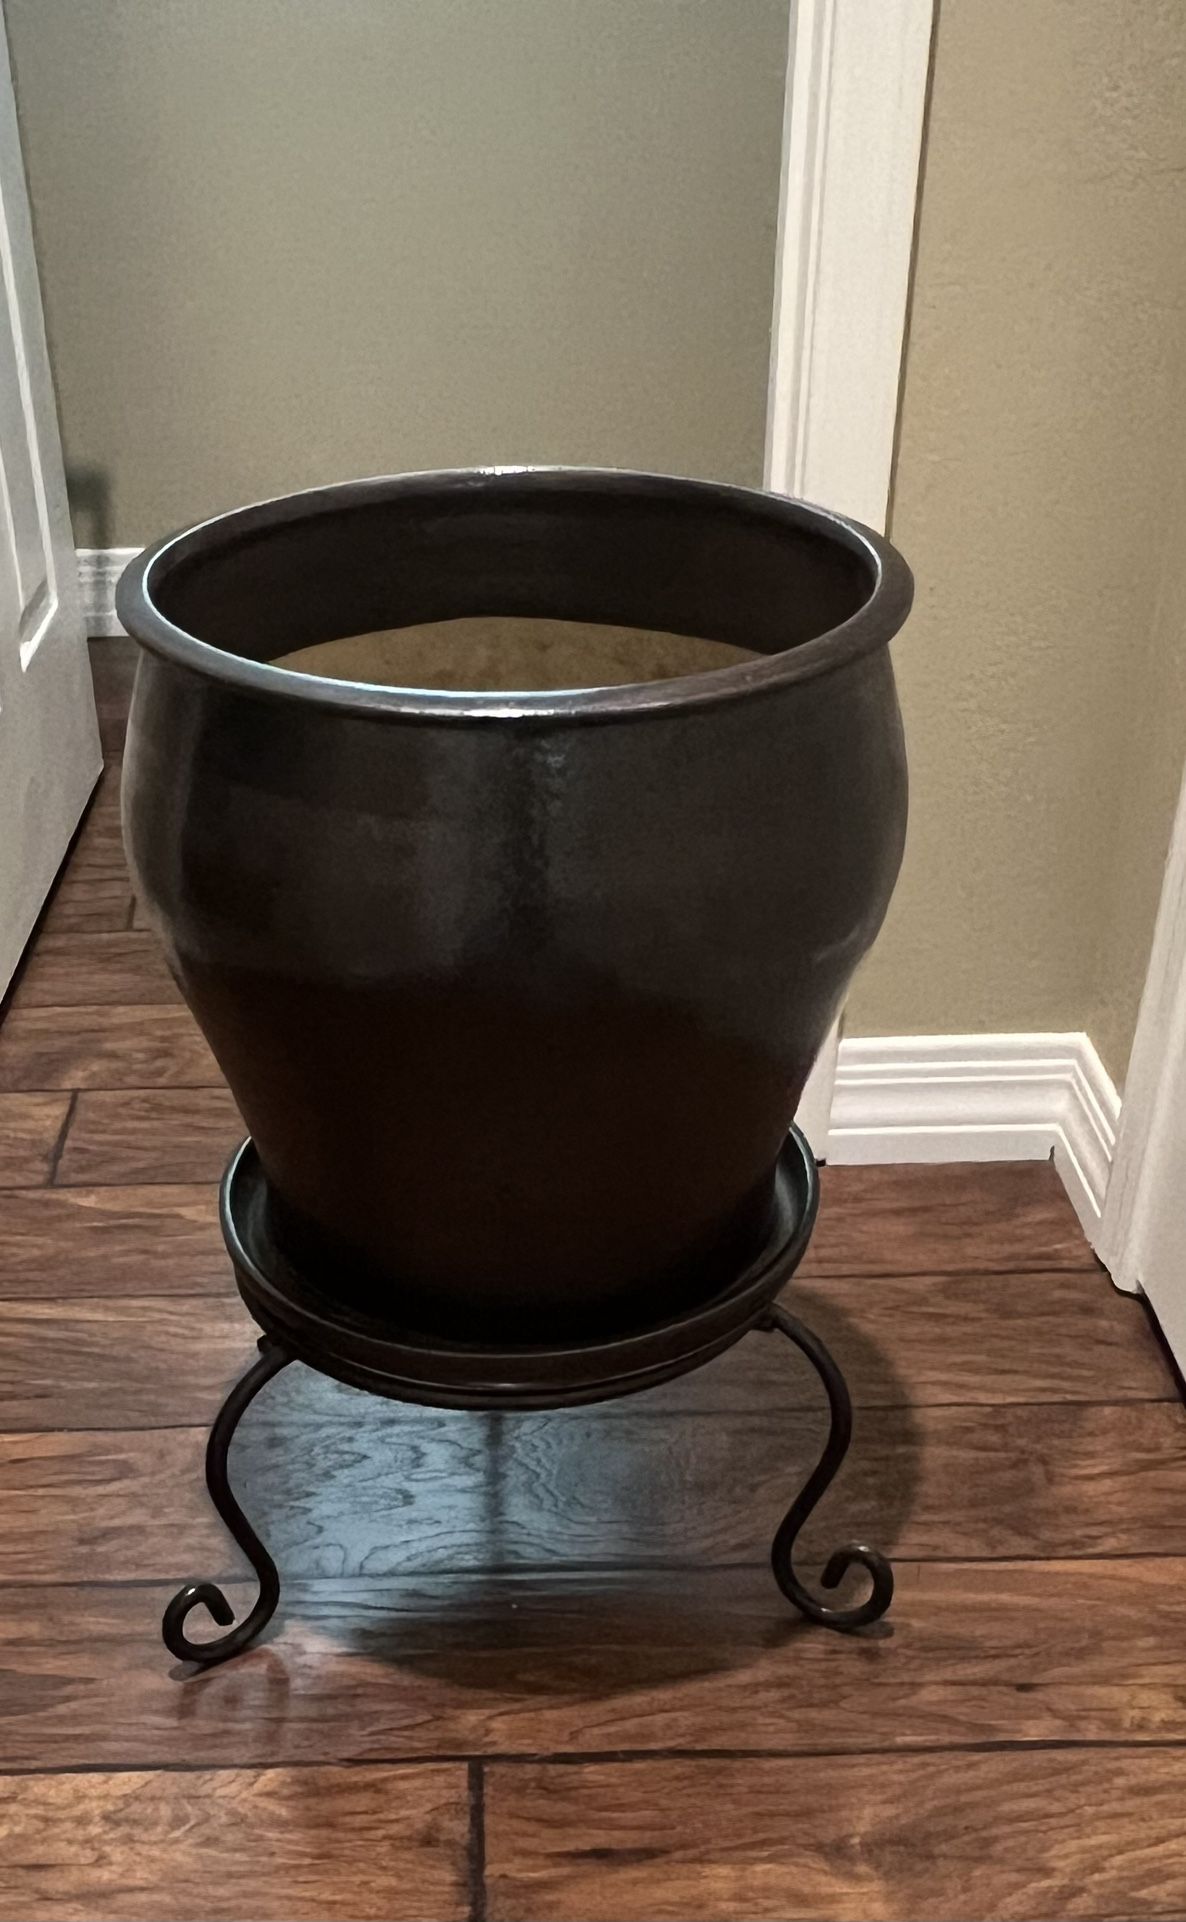  Large Ceramic Flower Pot 15 X 16 With Stand